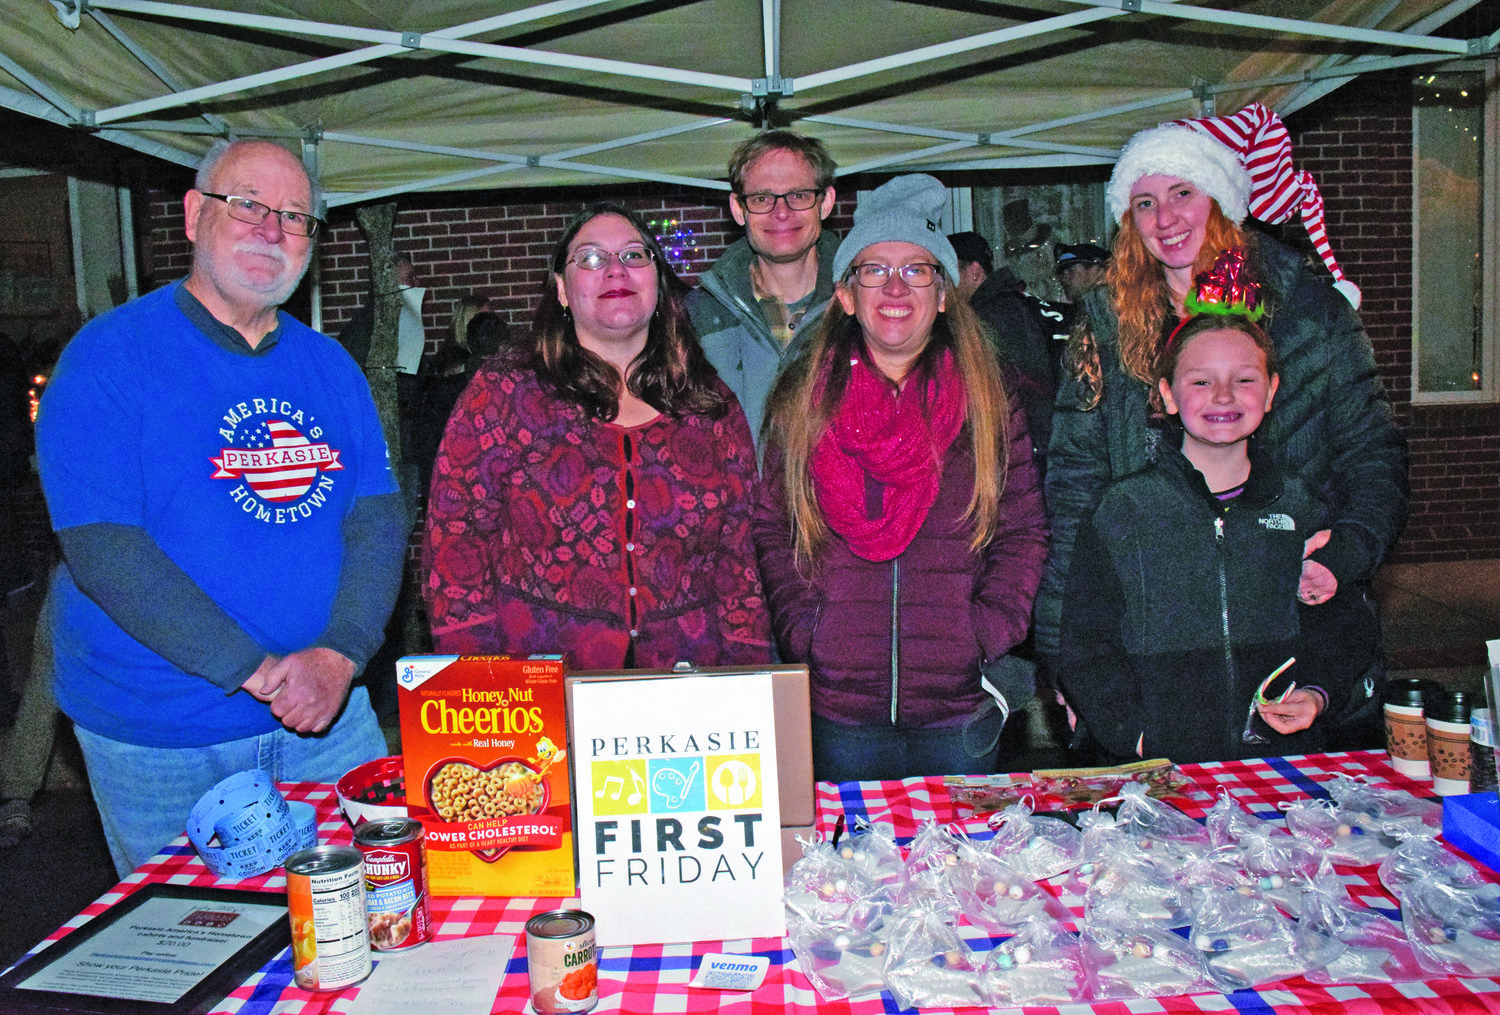 Joe Ferry, director of Perkasie Towne Improvement Association, and a team of helpers oversee a food donation fundraiser table.